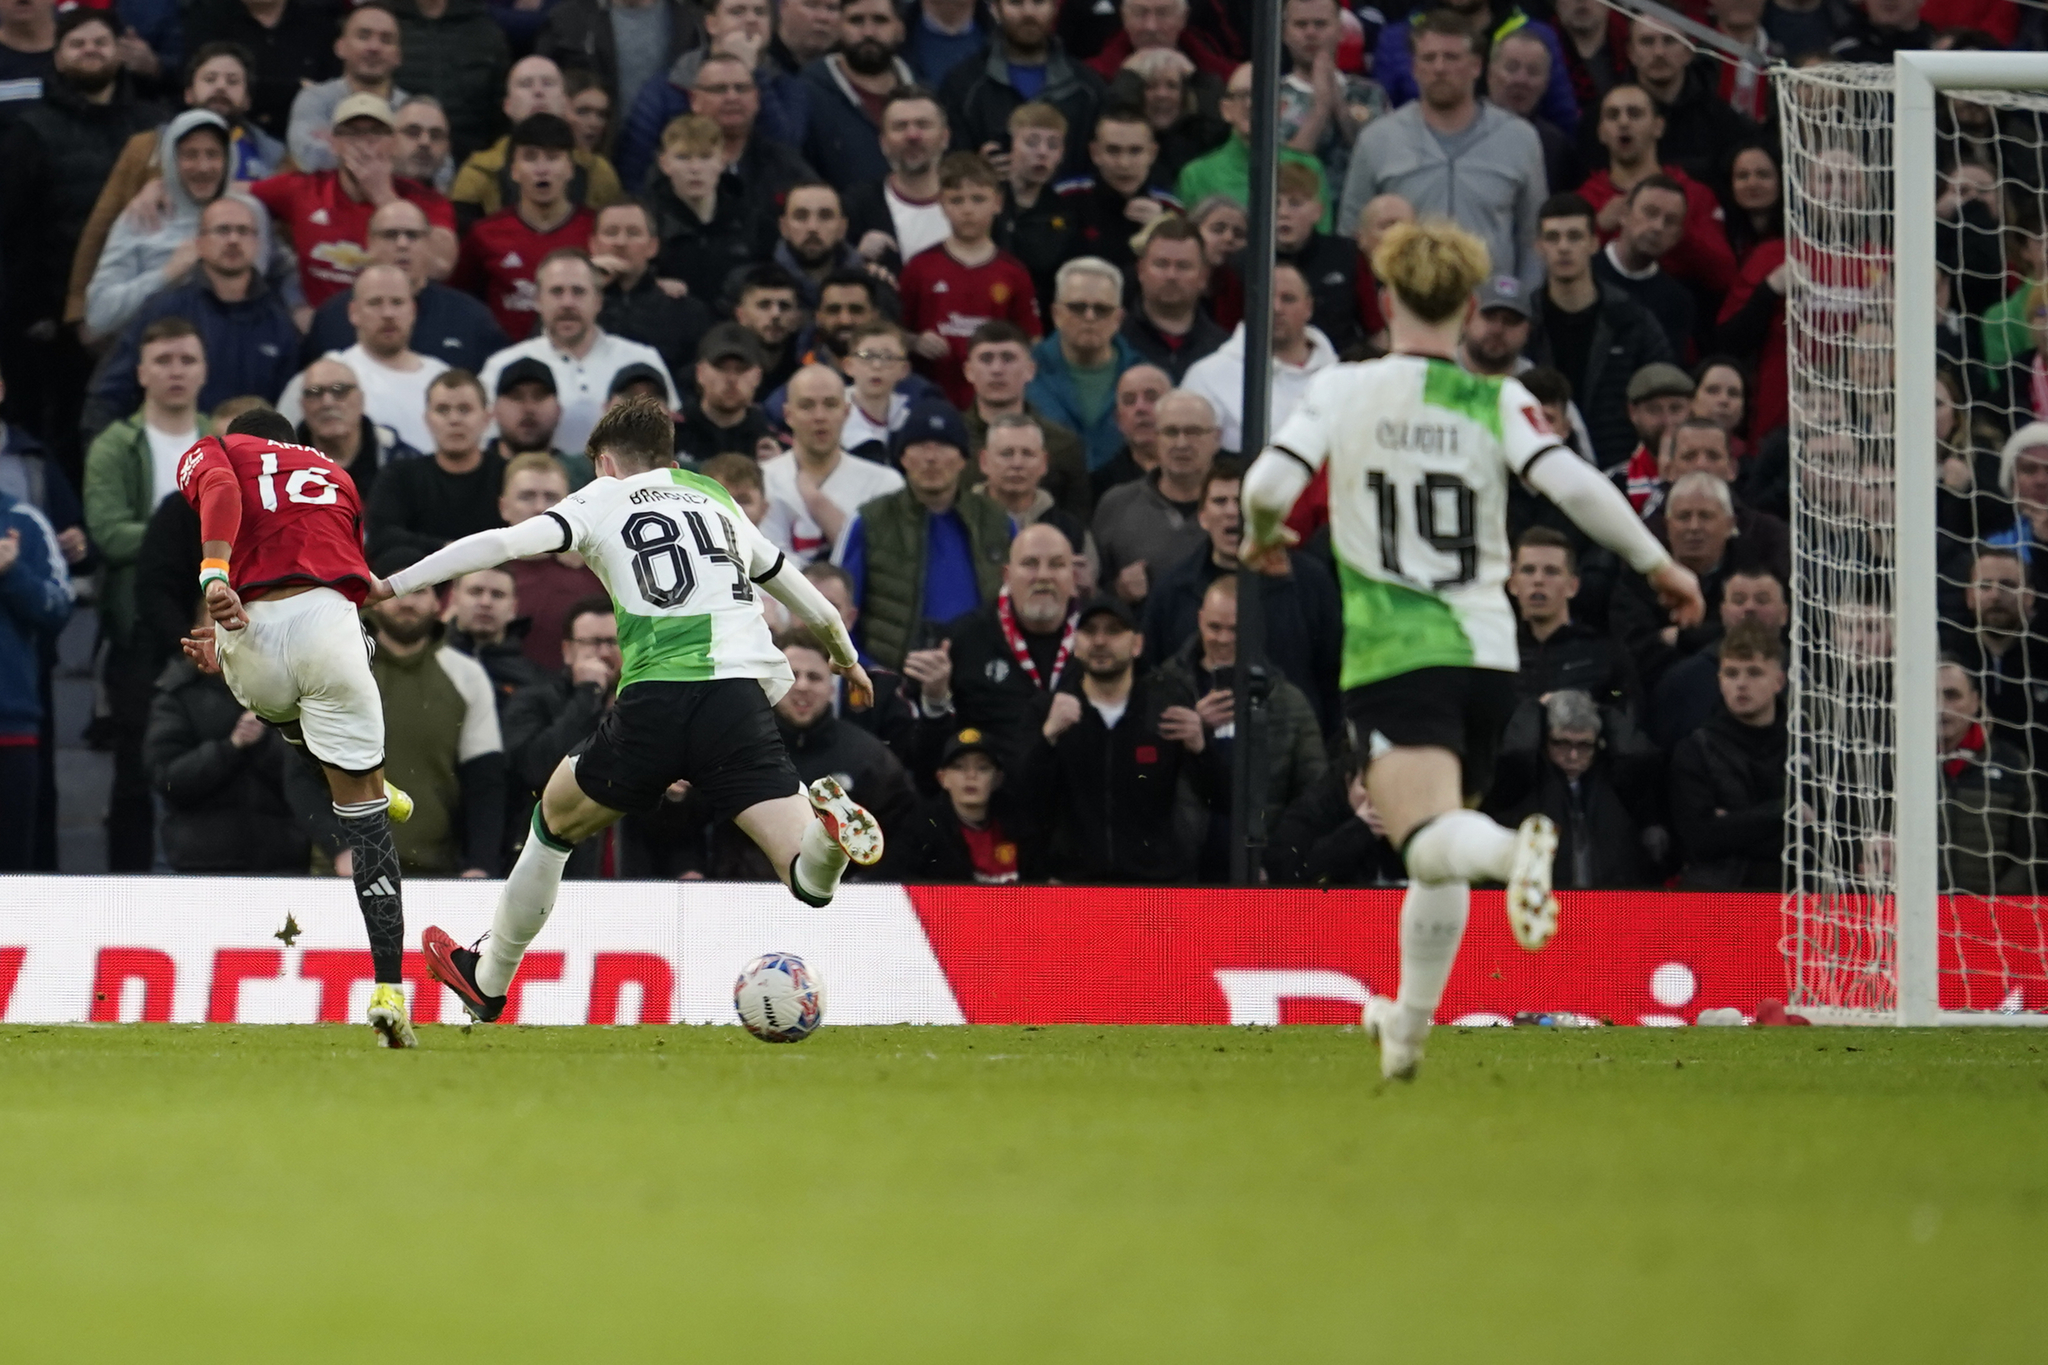 Amad Diallo, left, scores Manchester Uniteds fourth goal during the FA Cup quarterfinal